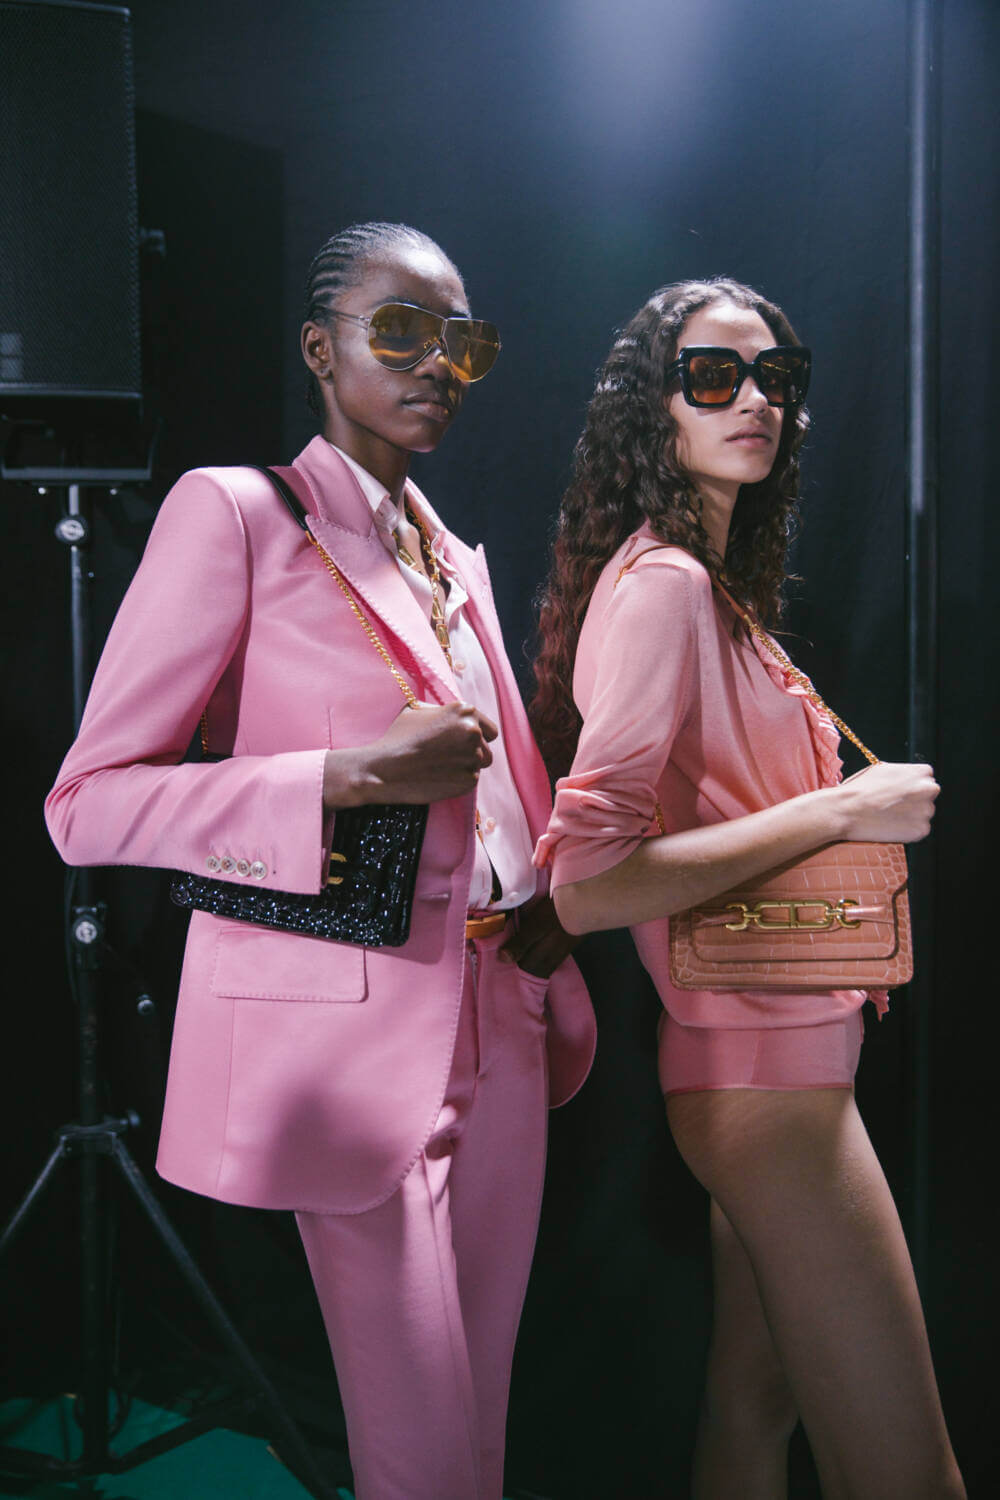 Tom Ford Spring 2021 Campaign